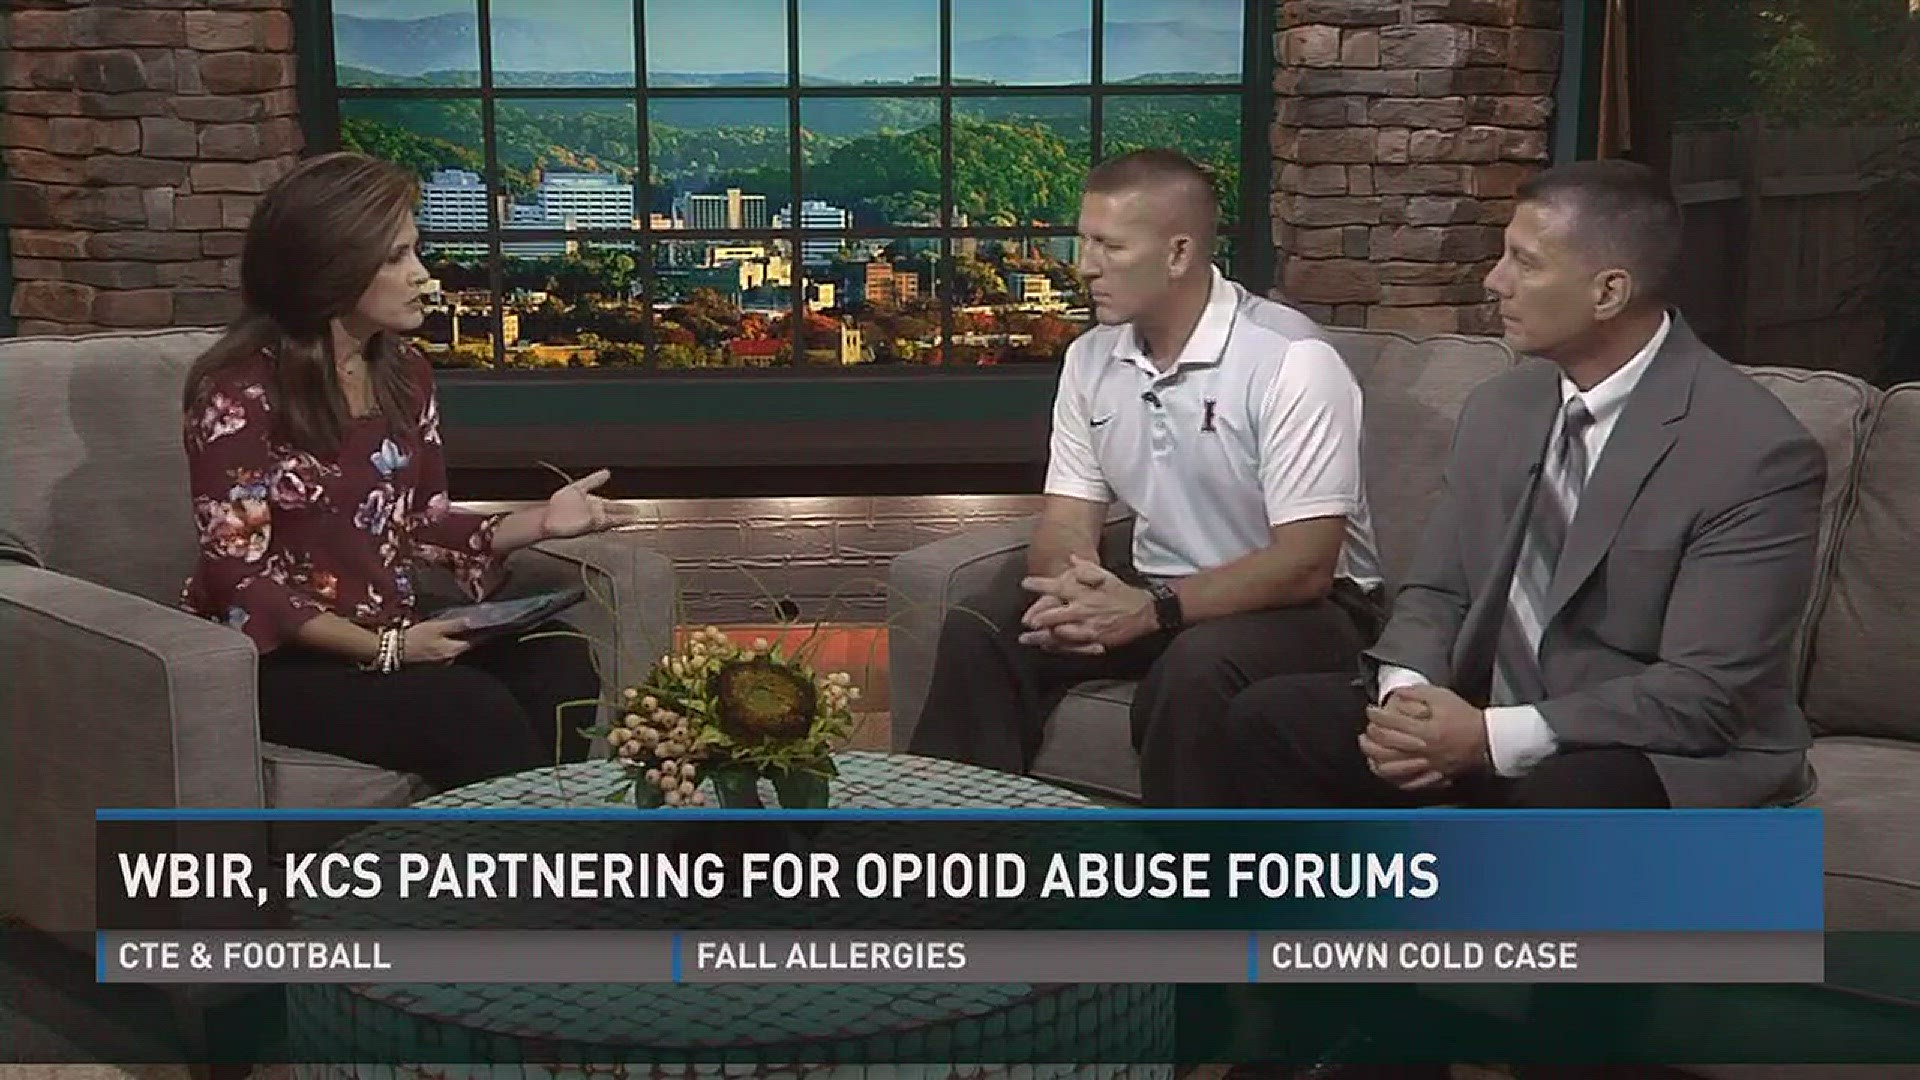 Knox County Schools and WBIR are working together to present four public forums this fall to inform parents about the dangers of opioids.